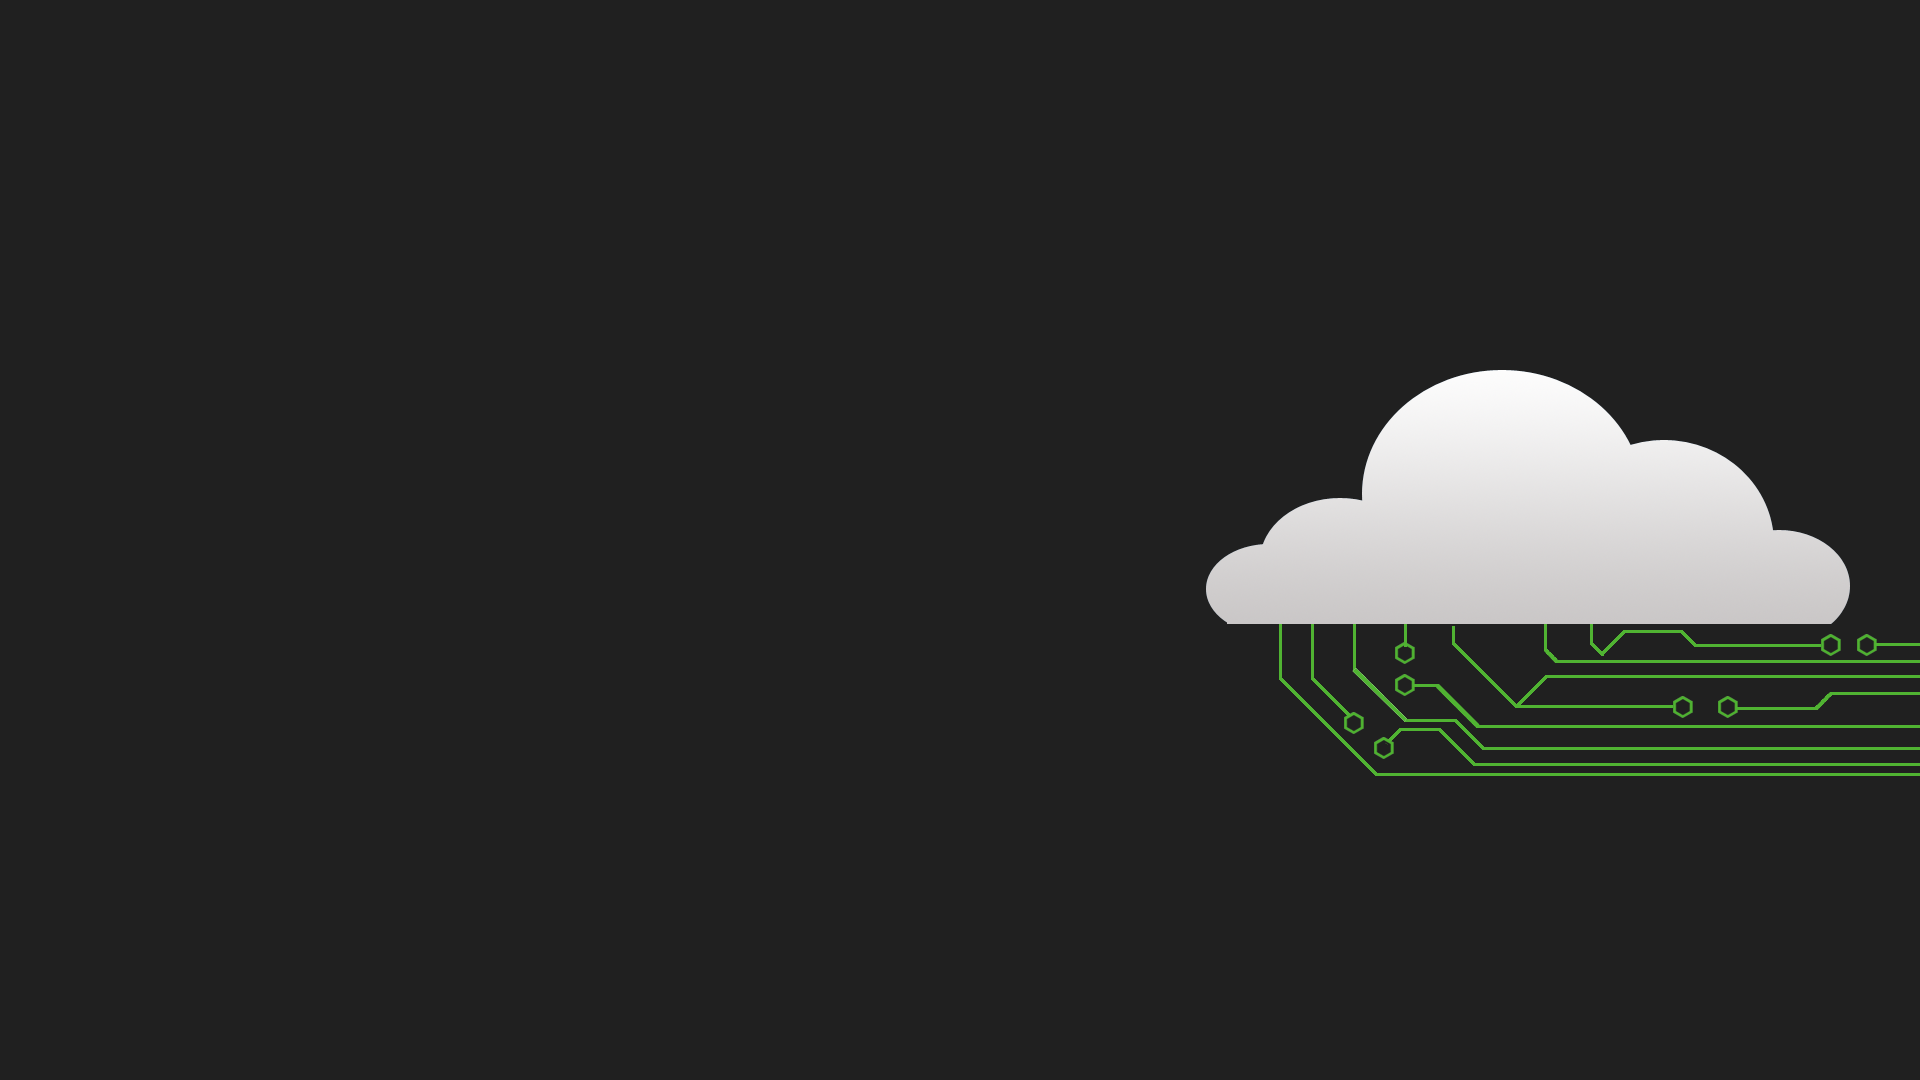 General 1920x1080 circuitry minimalism clouds simple background electronic black background